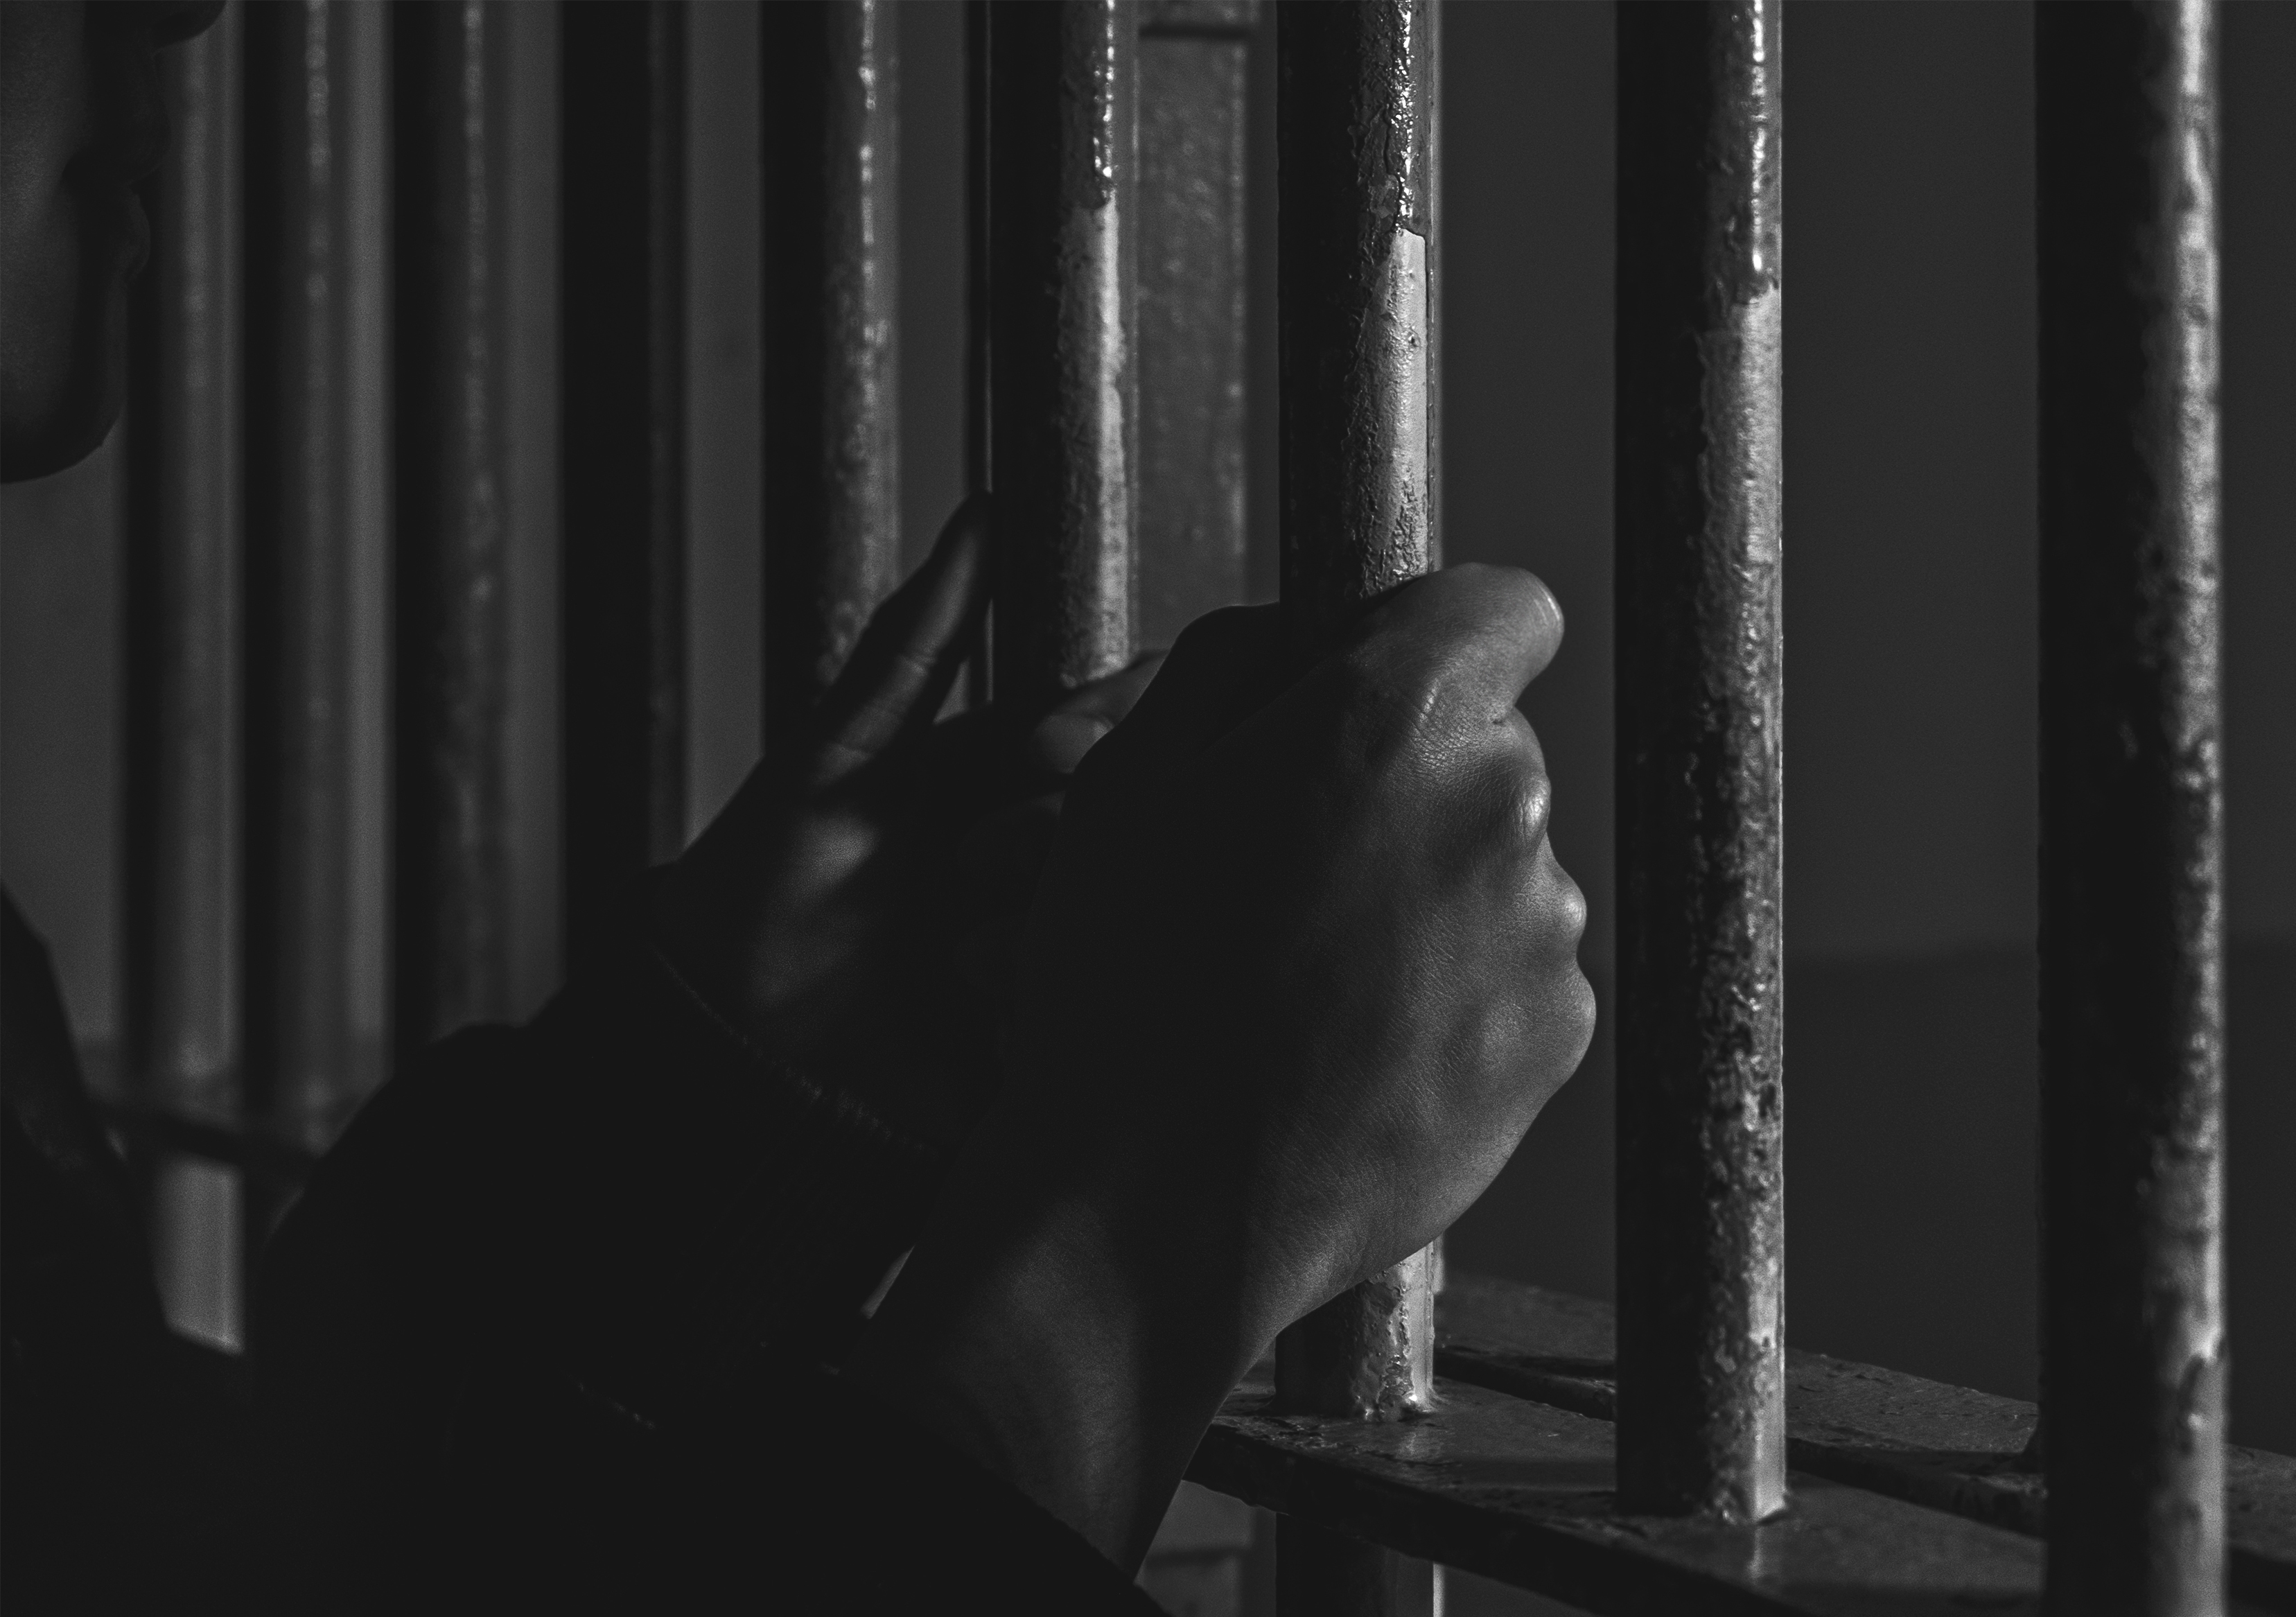 Despite making up only 3% of the overall population, Indigenous Australians are twelve times more likely to be incarcerated than the wider community. Photo: Shutterstock